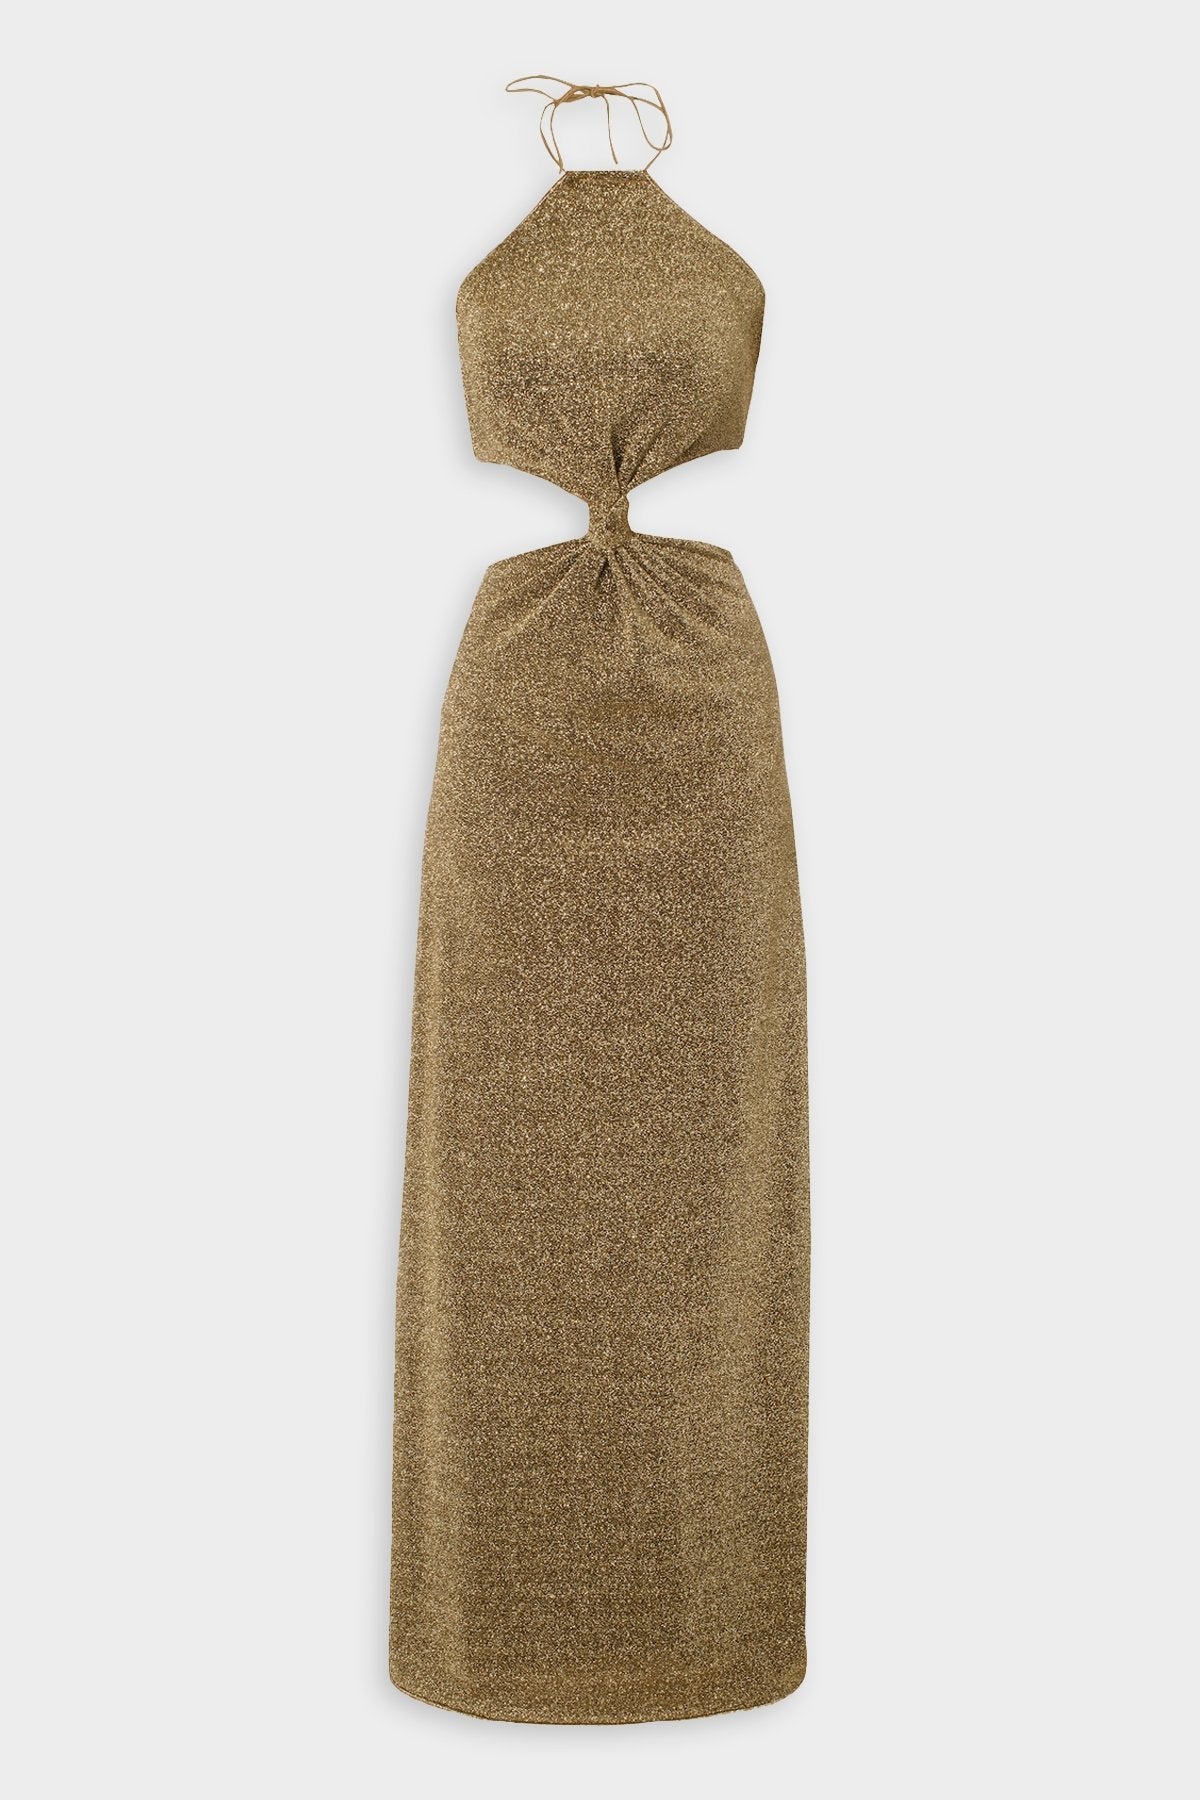 Lumiere Knotted Dress in Sand - shop-olivia.com